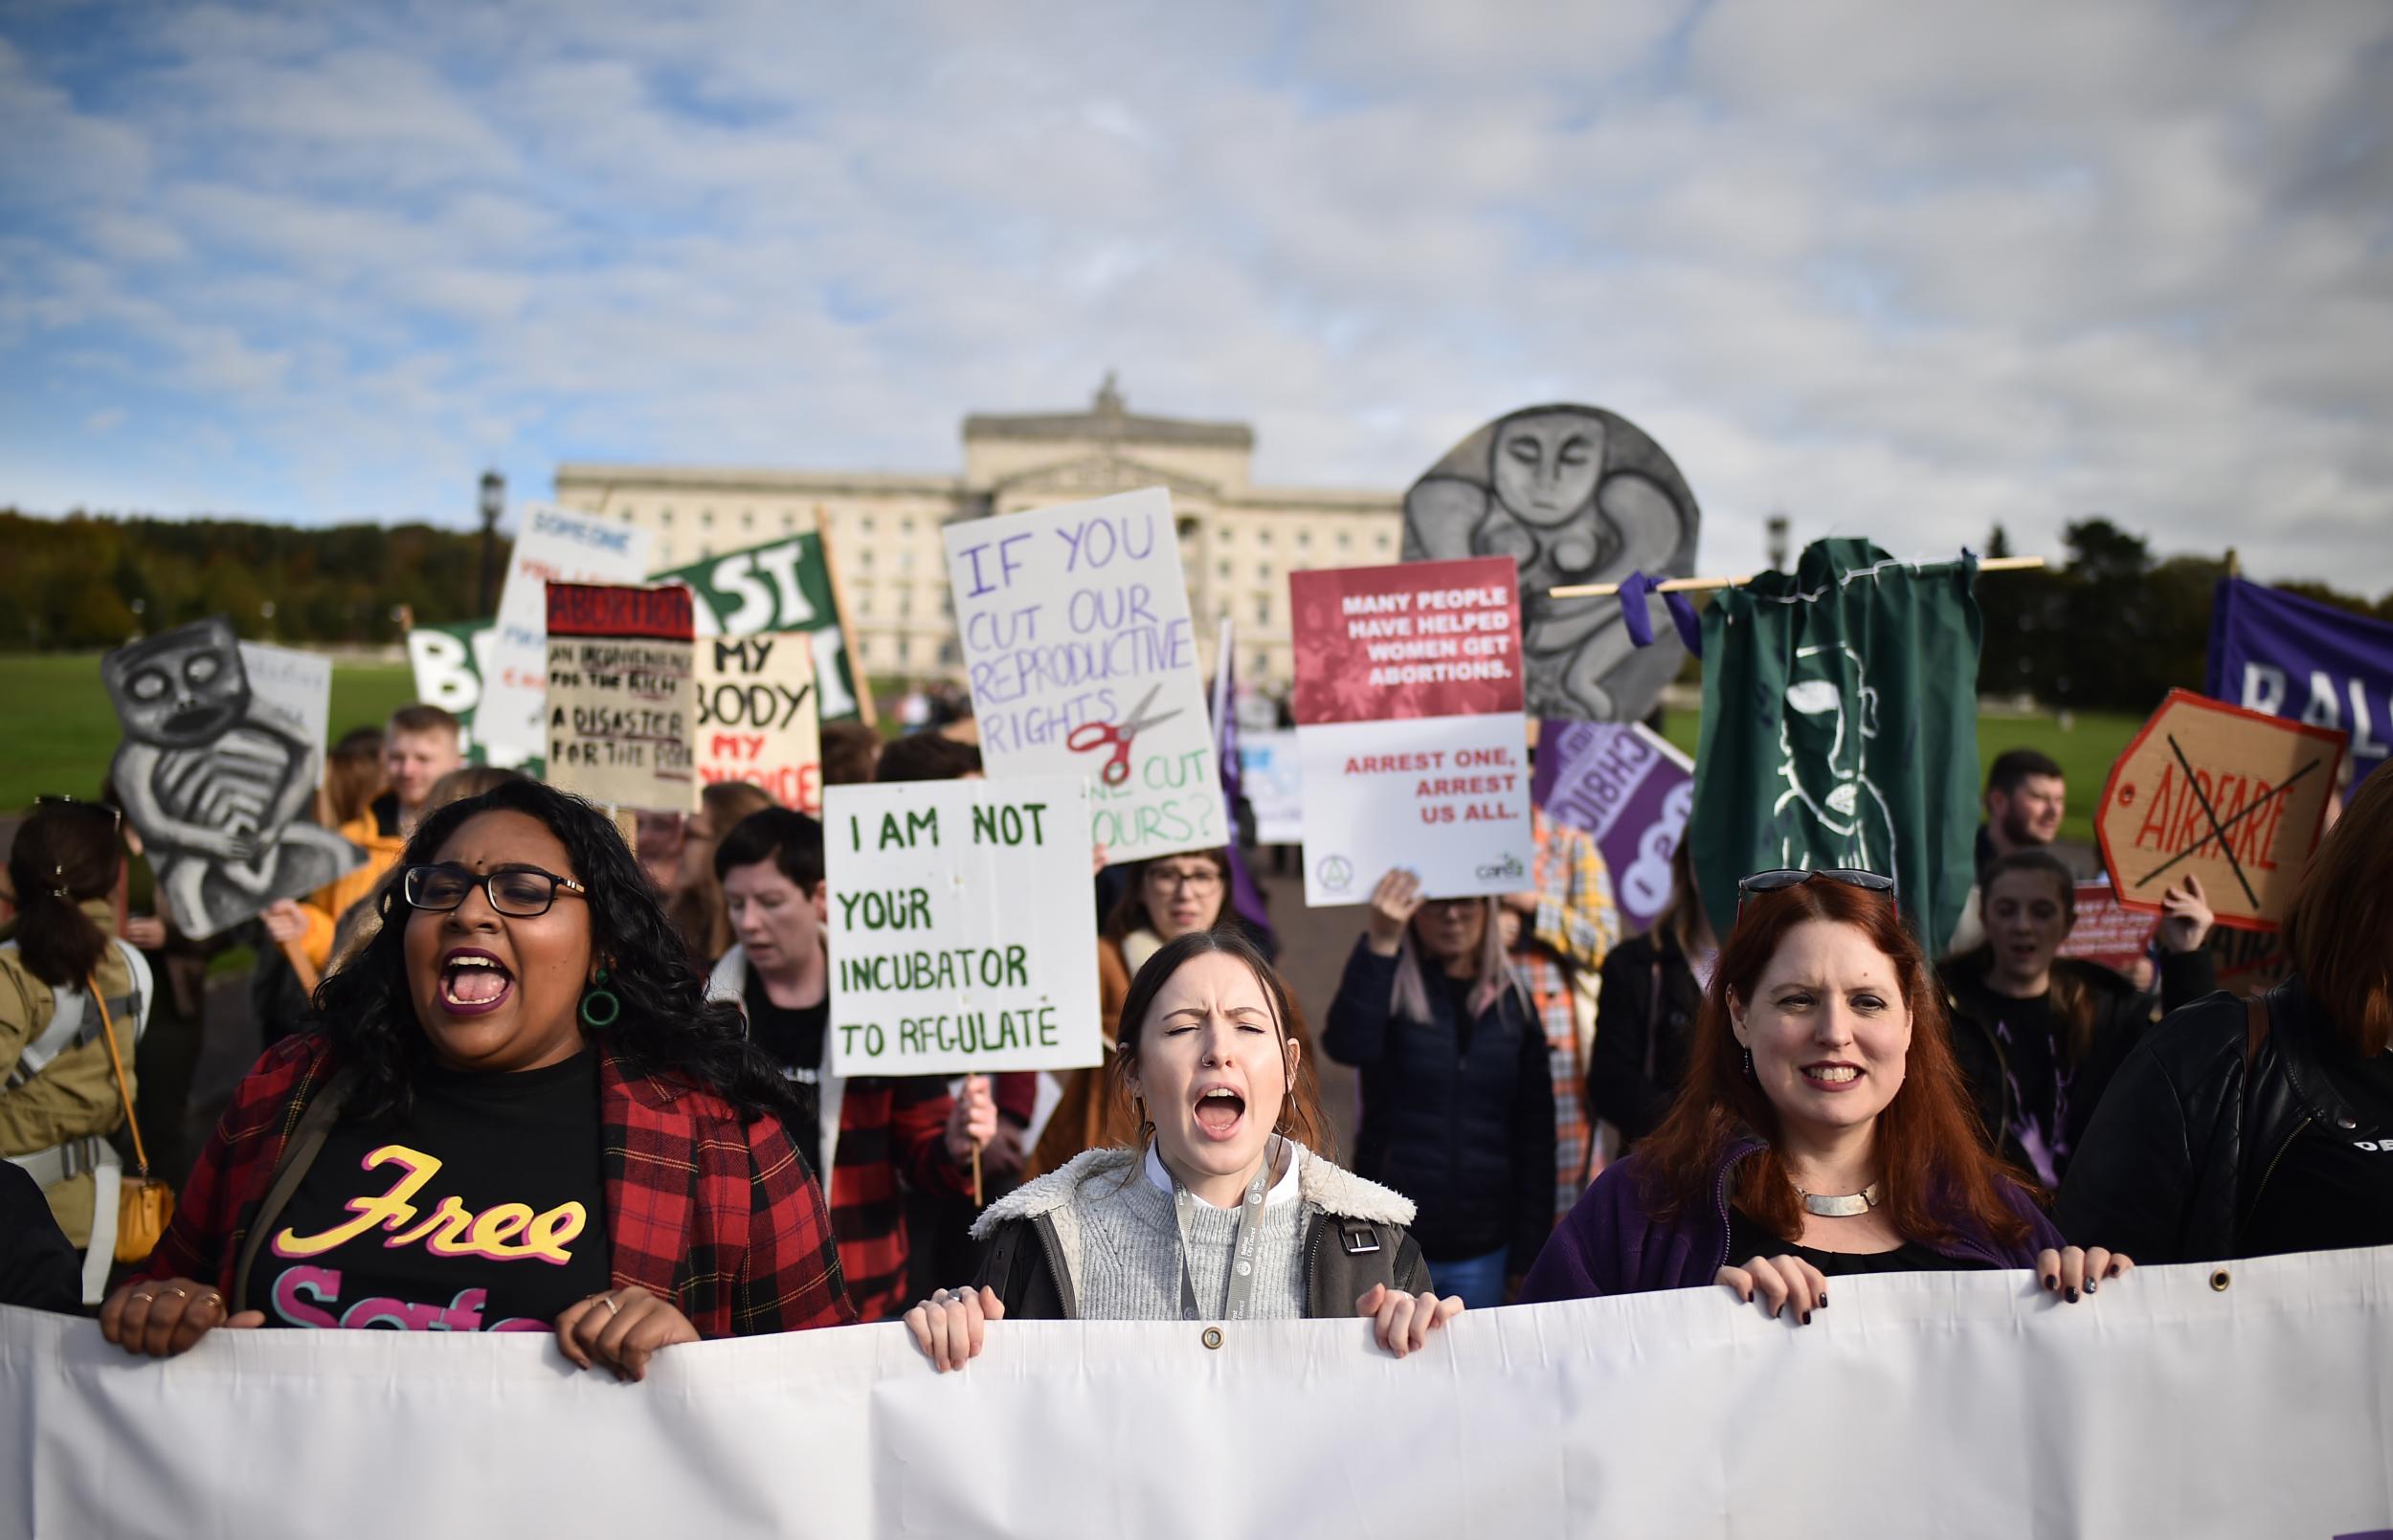 Abortion-rights demonstrators outside Stormont on the eve of the historic law change